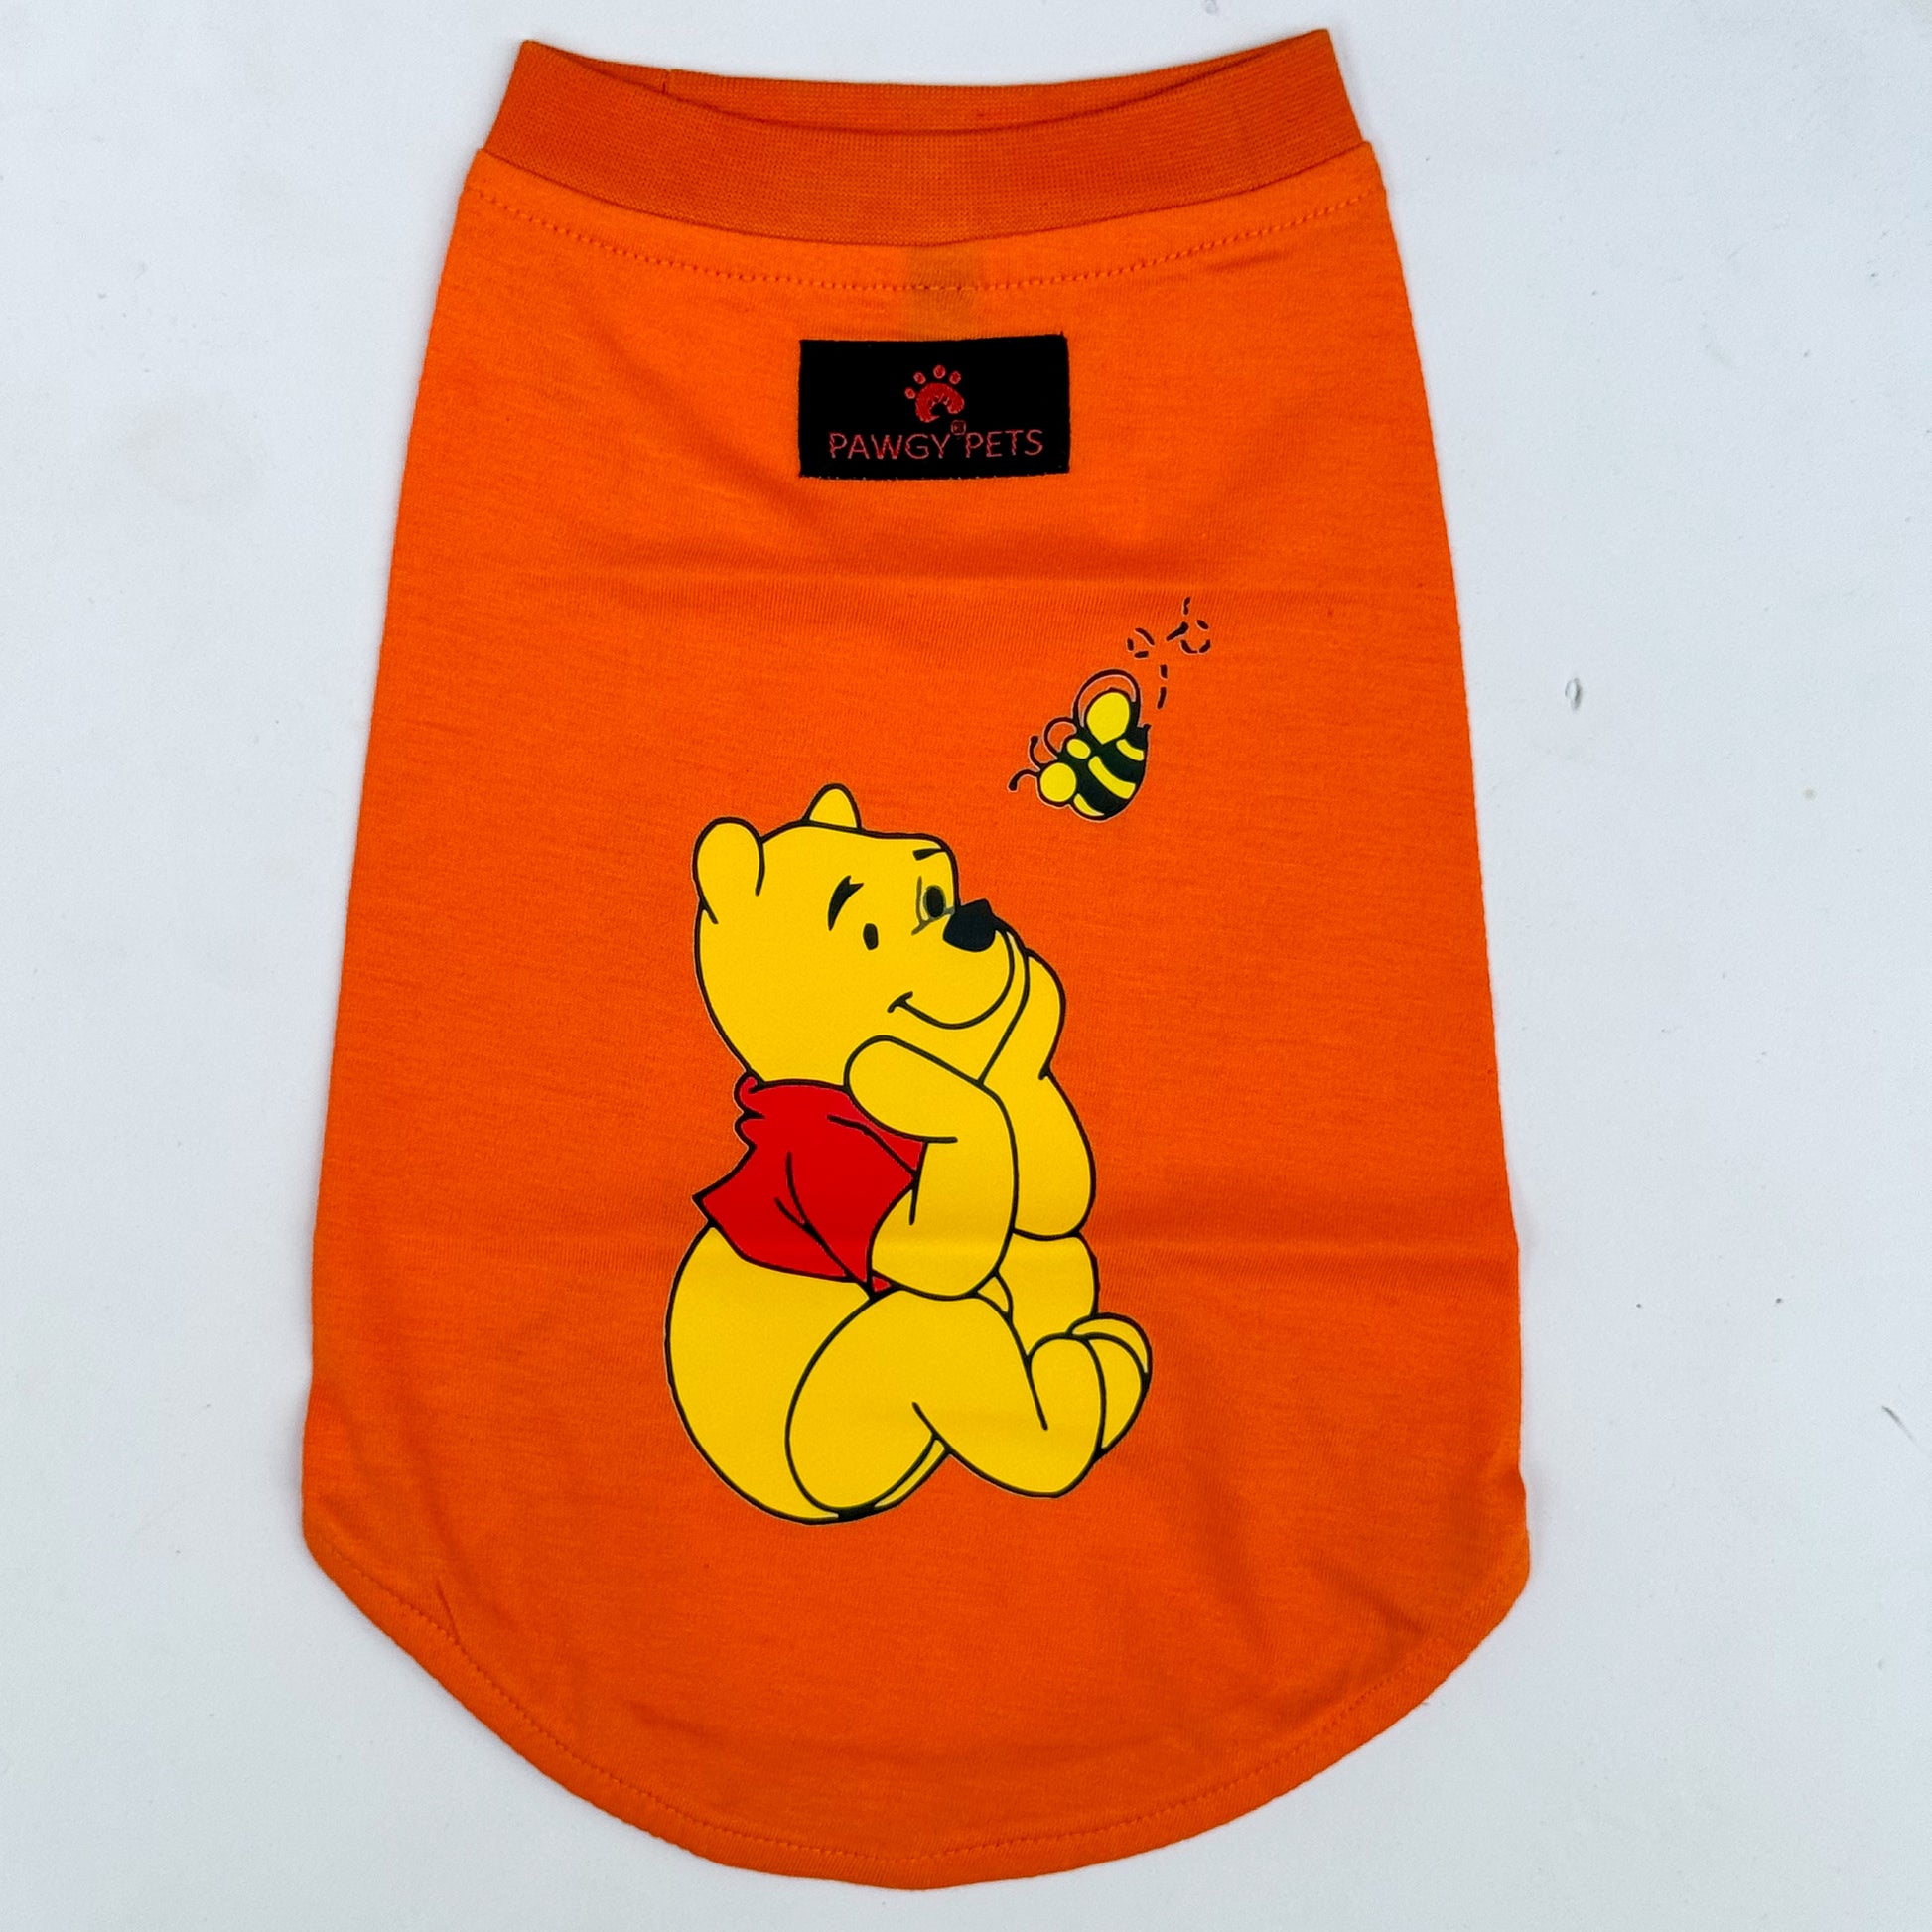 Pawgy Pets T-shirt Winne the Pooh Orange for Dogs & Cats